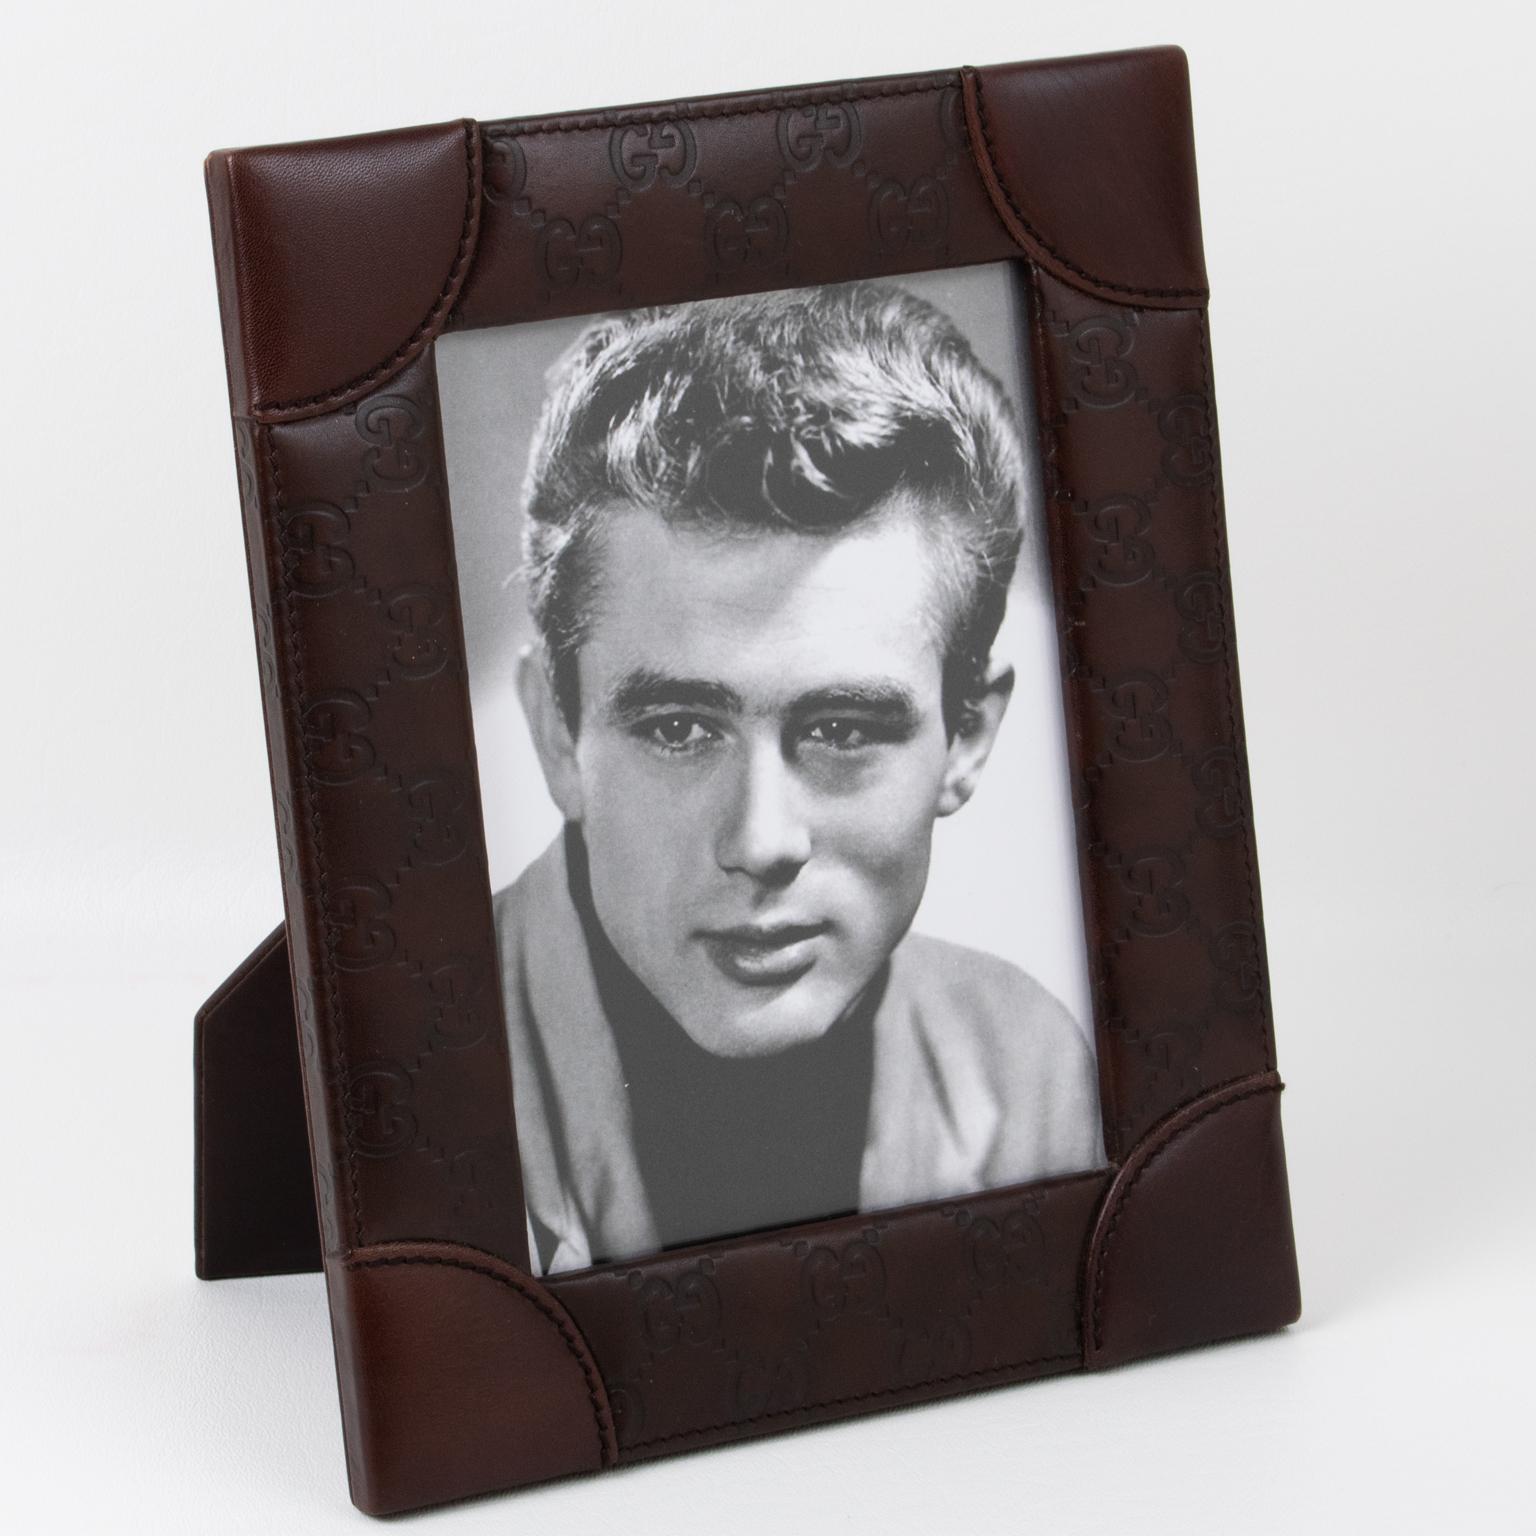 Italian designer Gucci designed this superb leather picture photo frame. The timeless and elegant brown leather has the 